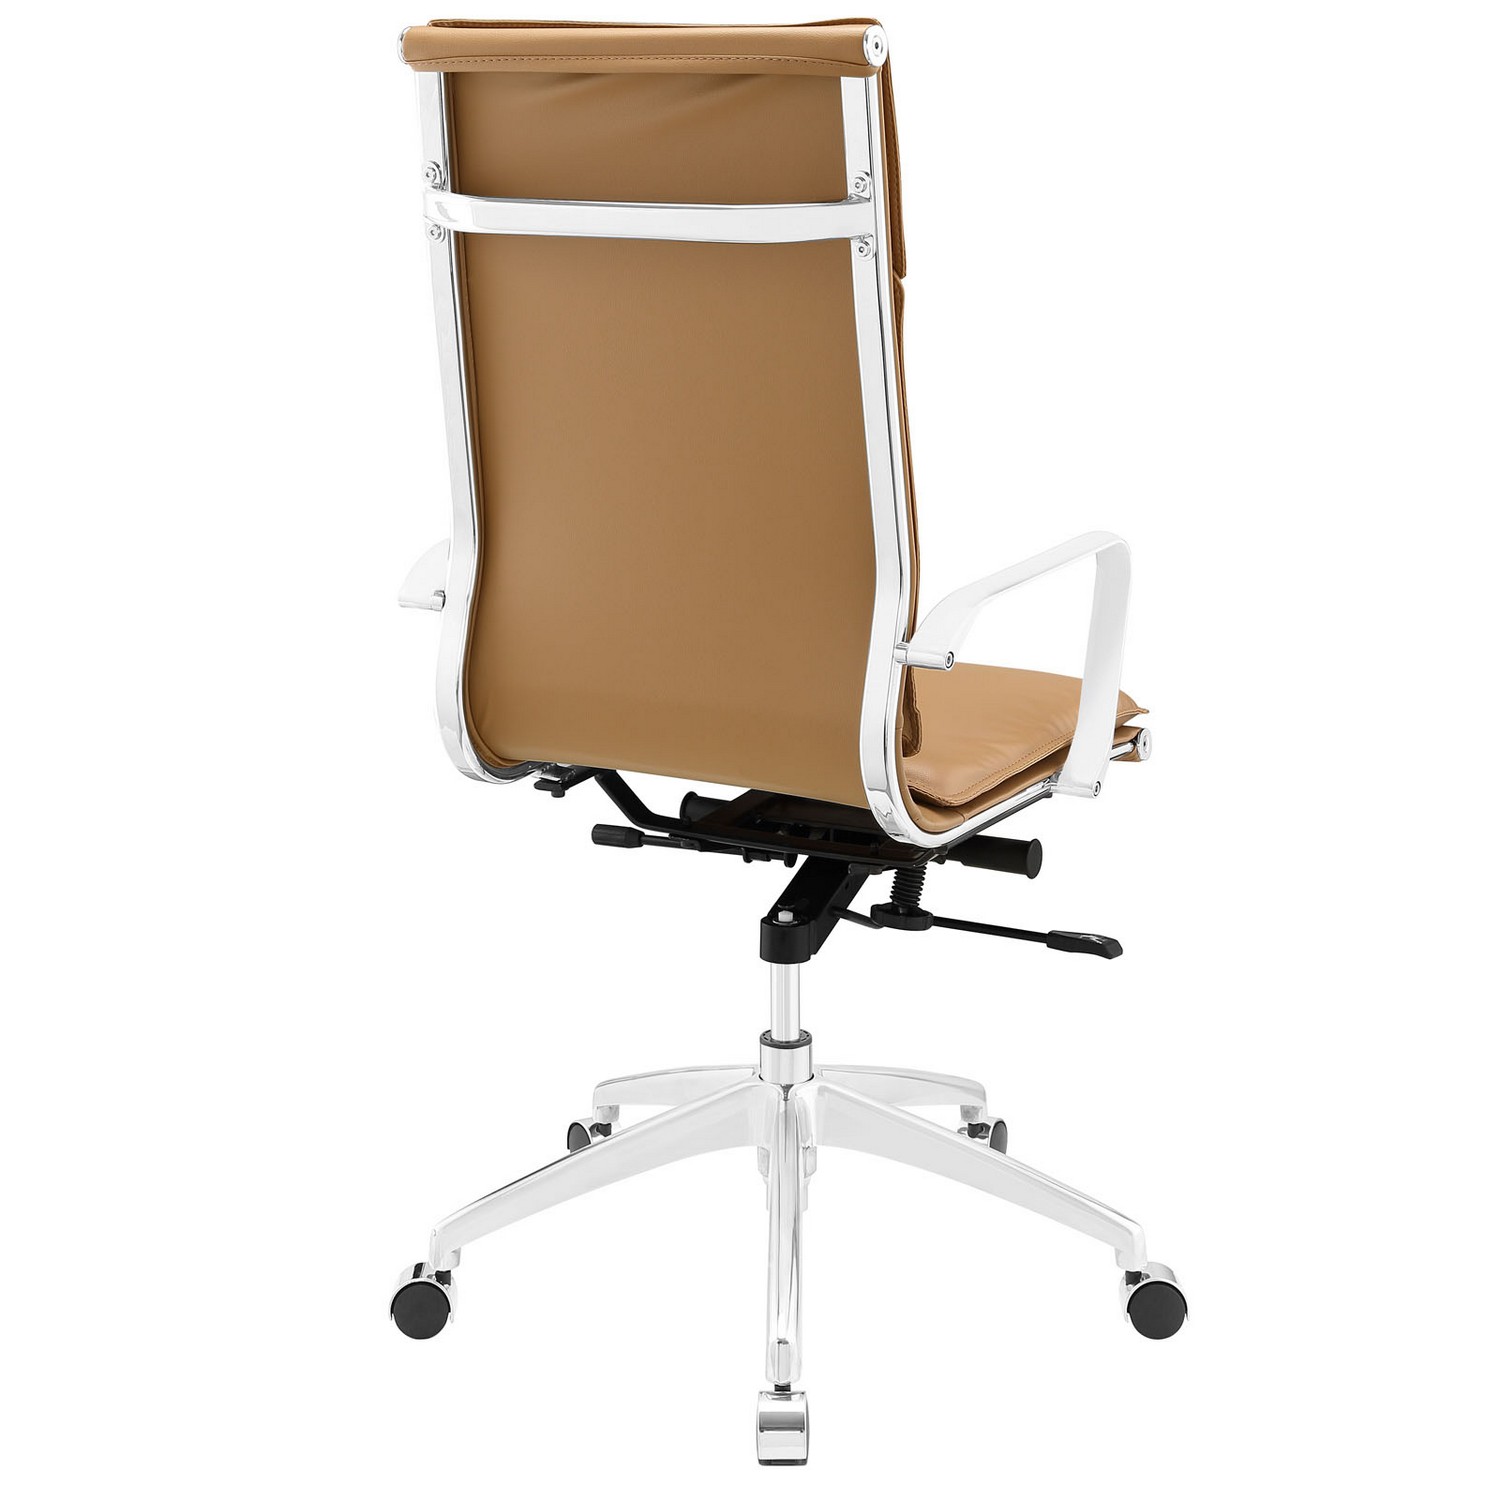 Modway Sage Highback Office Chair - Tan